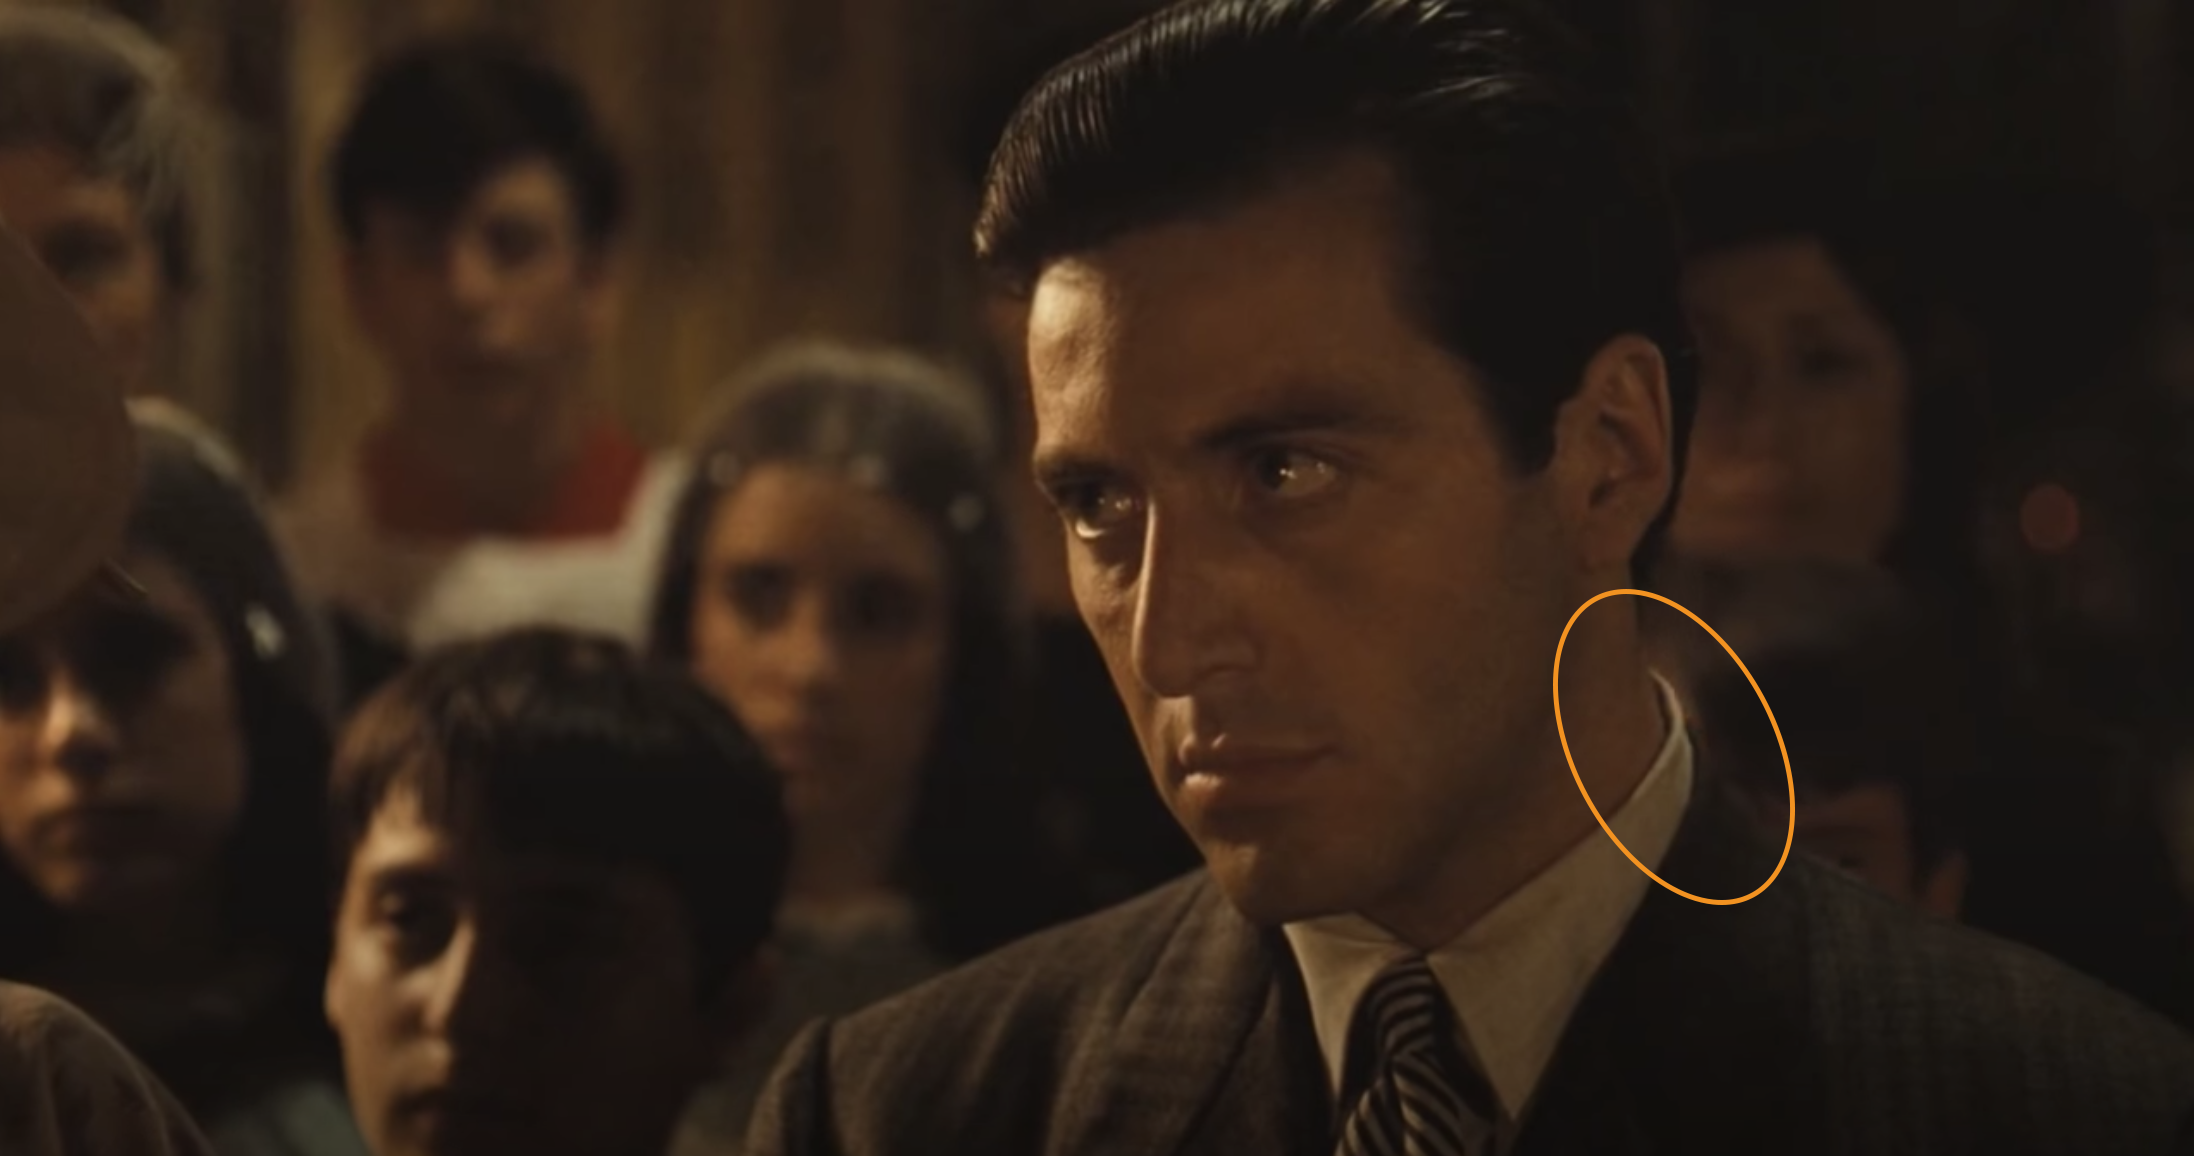 Backlighting of the subject in The Godfather